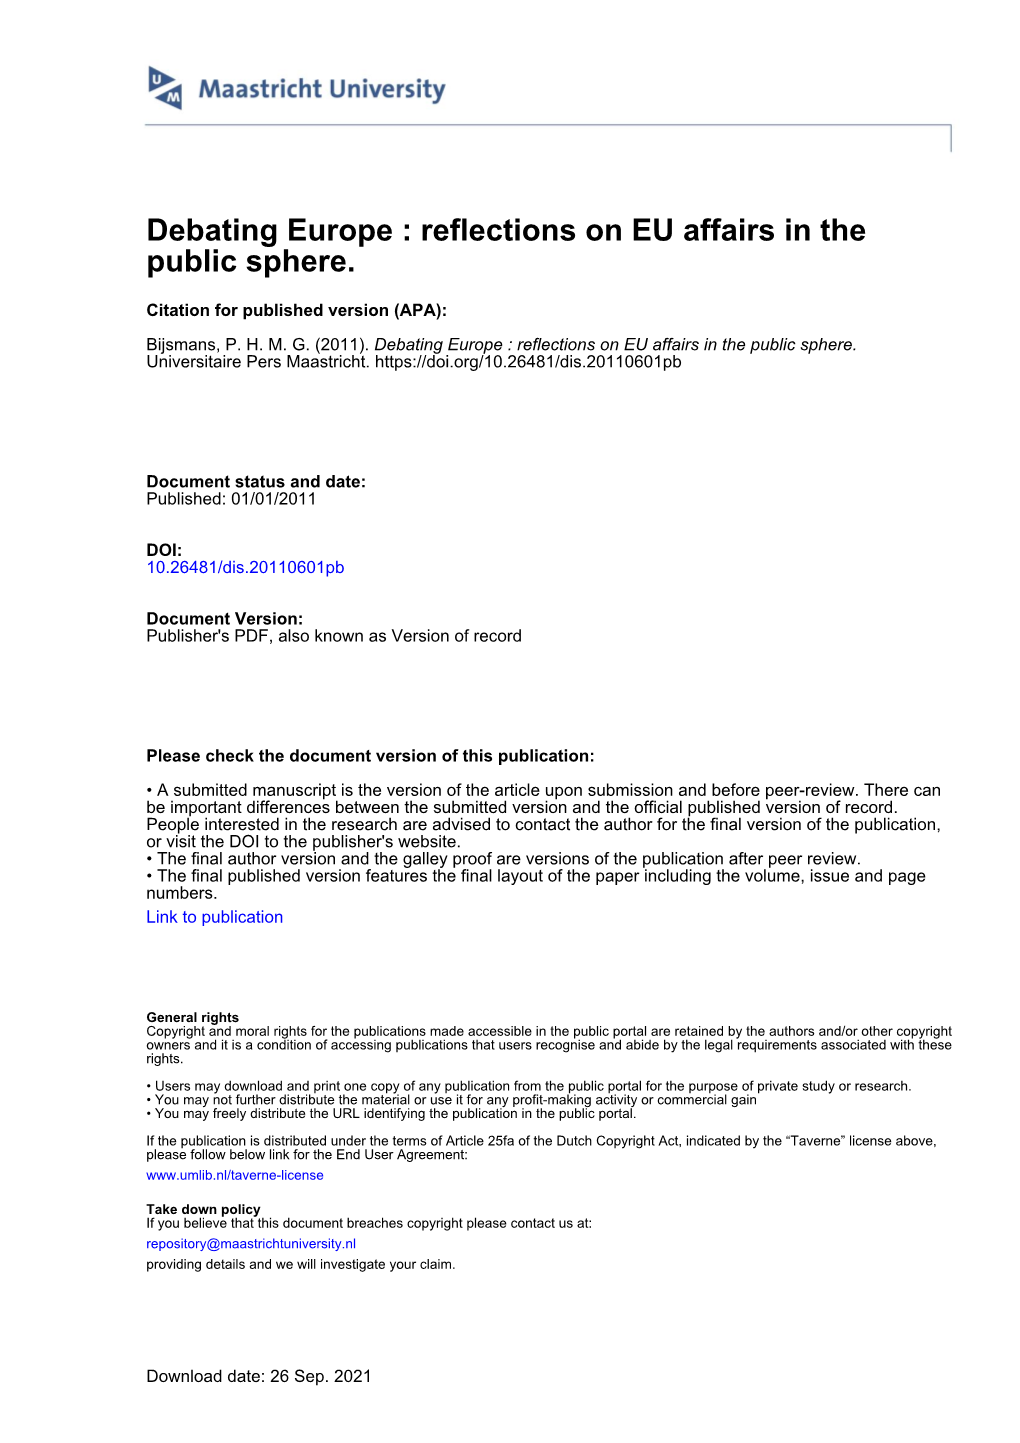 Debating Europe : Reflections on EU Affairs in the Public Sphere